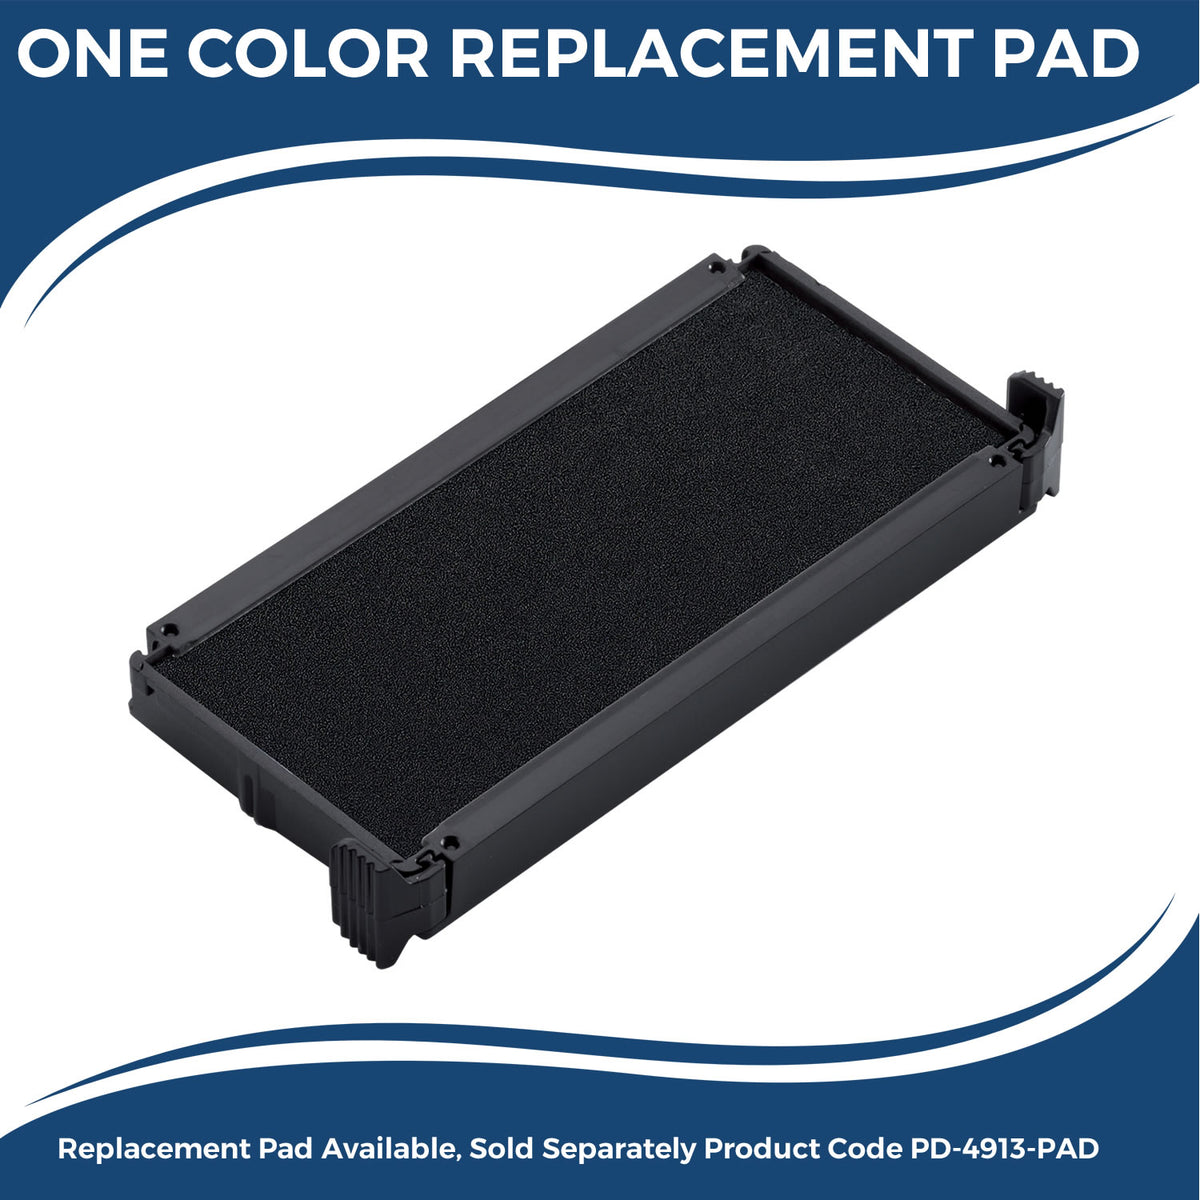 Large Self Inking Client Copy Stamp 4110S Large Replacment Pad